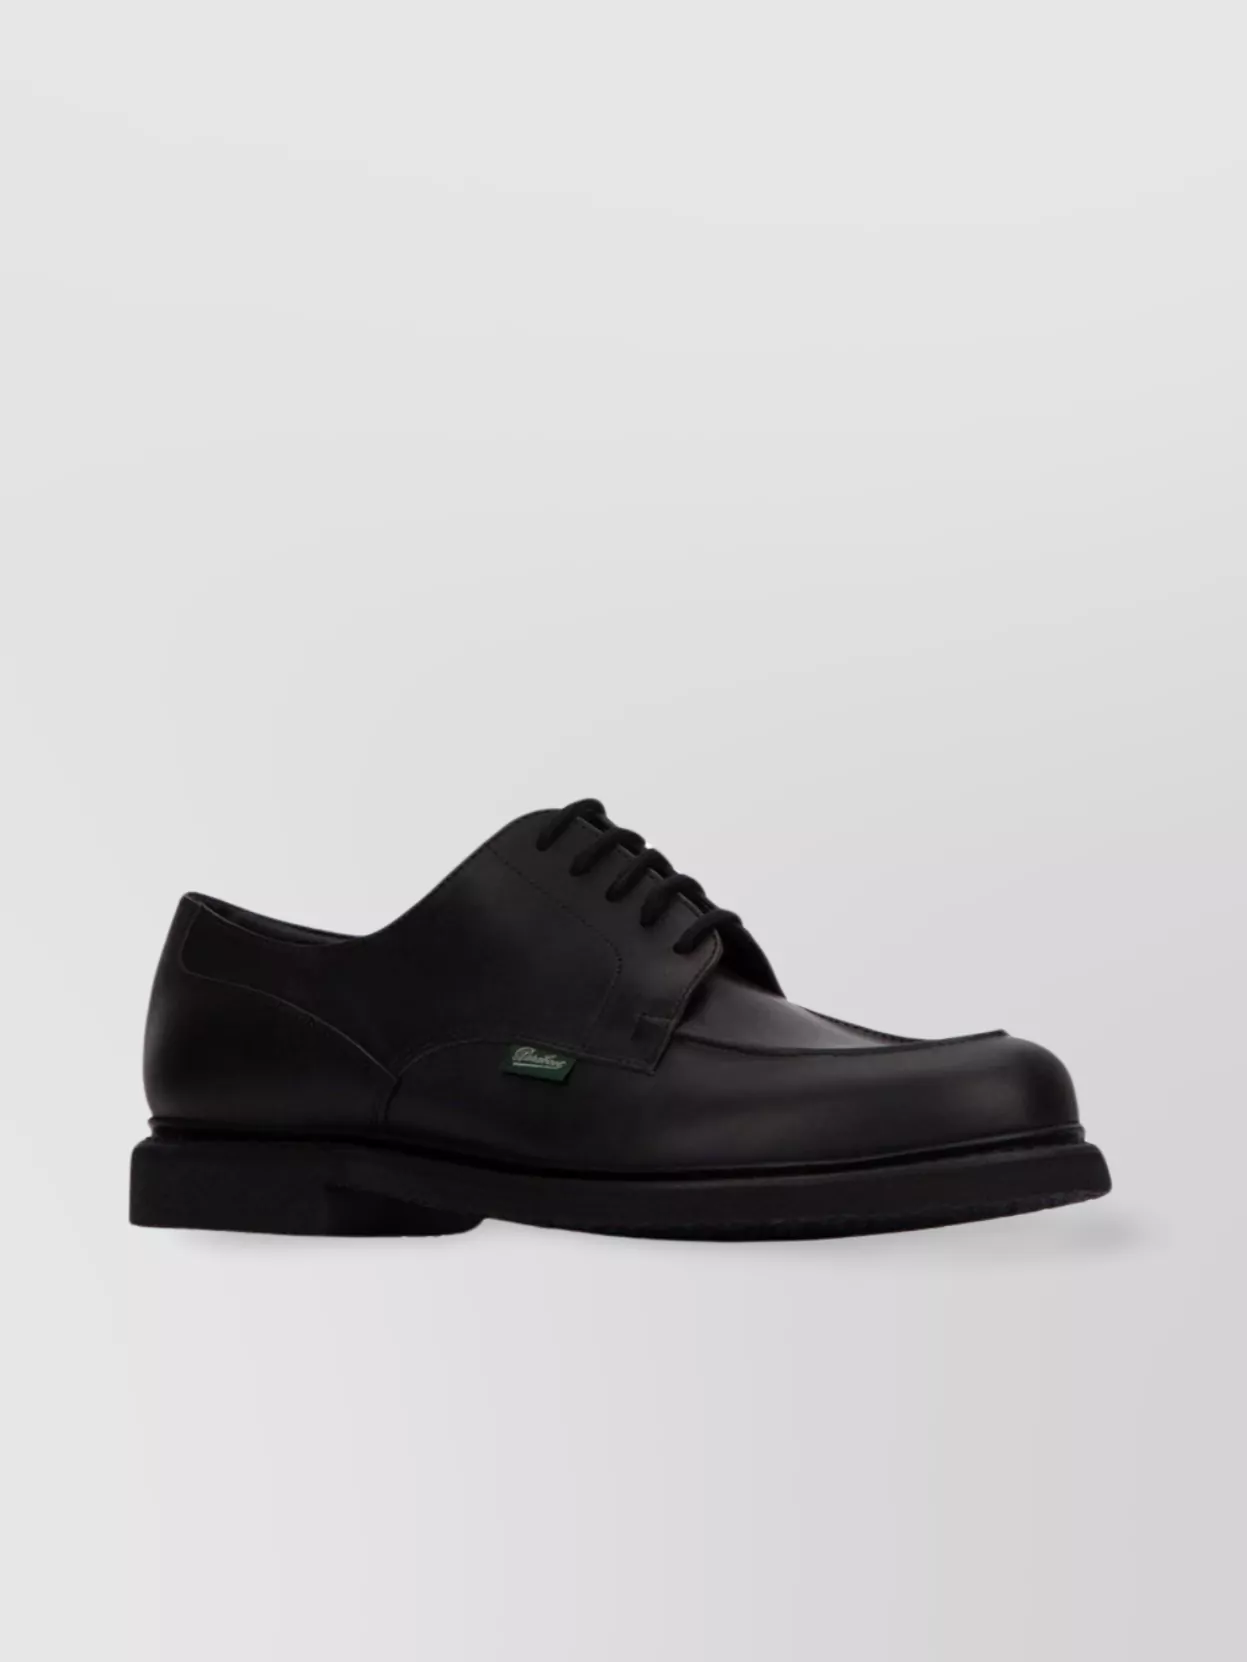 Paraboot Round Toe Lace-up Shoes In Black